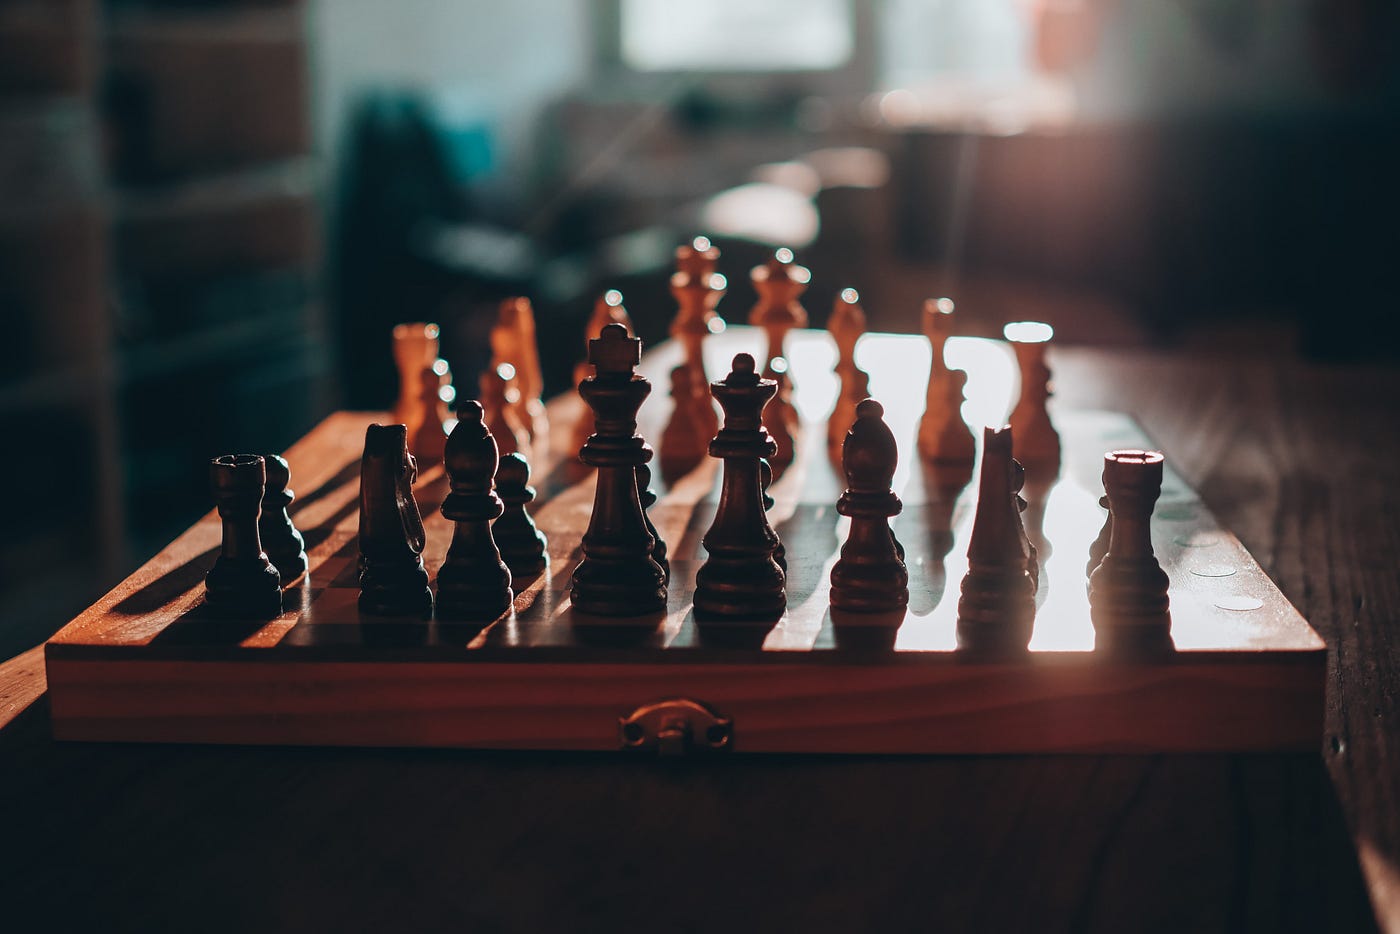 How to Build a Chess AI with Python, by Esteban Thilliez